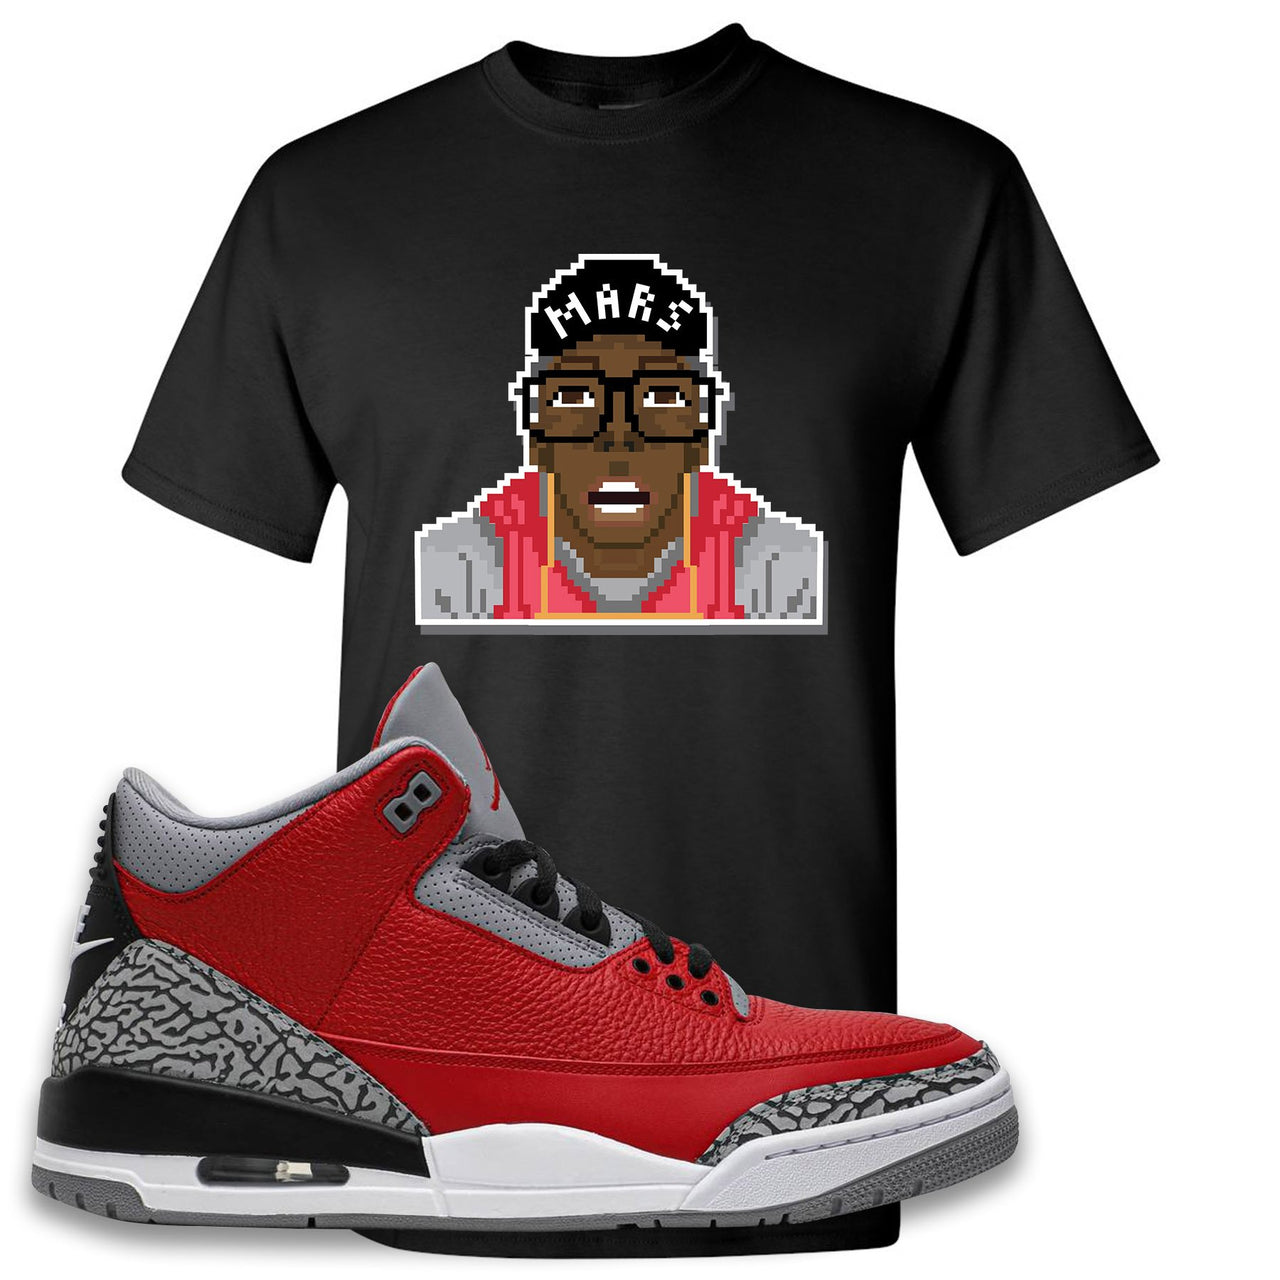 Jordan 3 Red Cement Chicago All-Star Sneaker Black T Shirt | Tees to match Jordan 3 All Star Red Cement Shoes | Mars Pixel